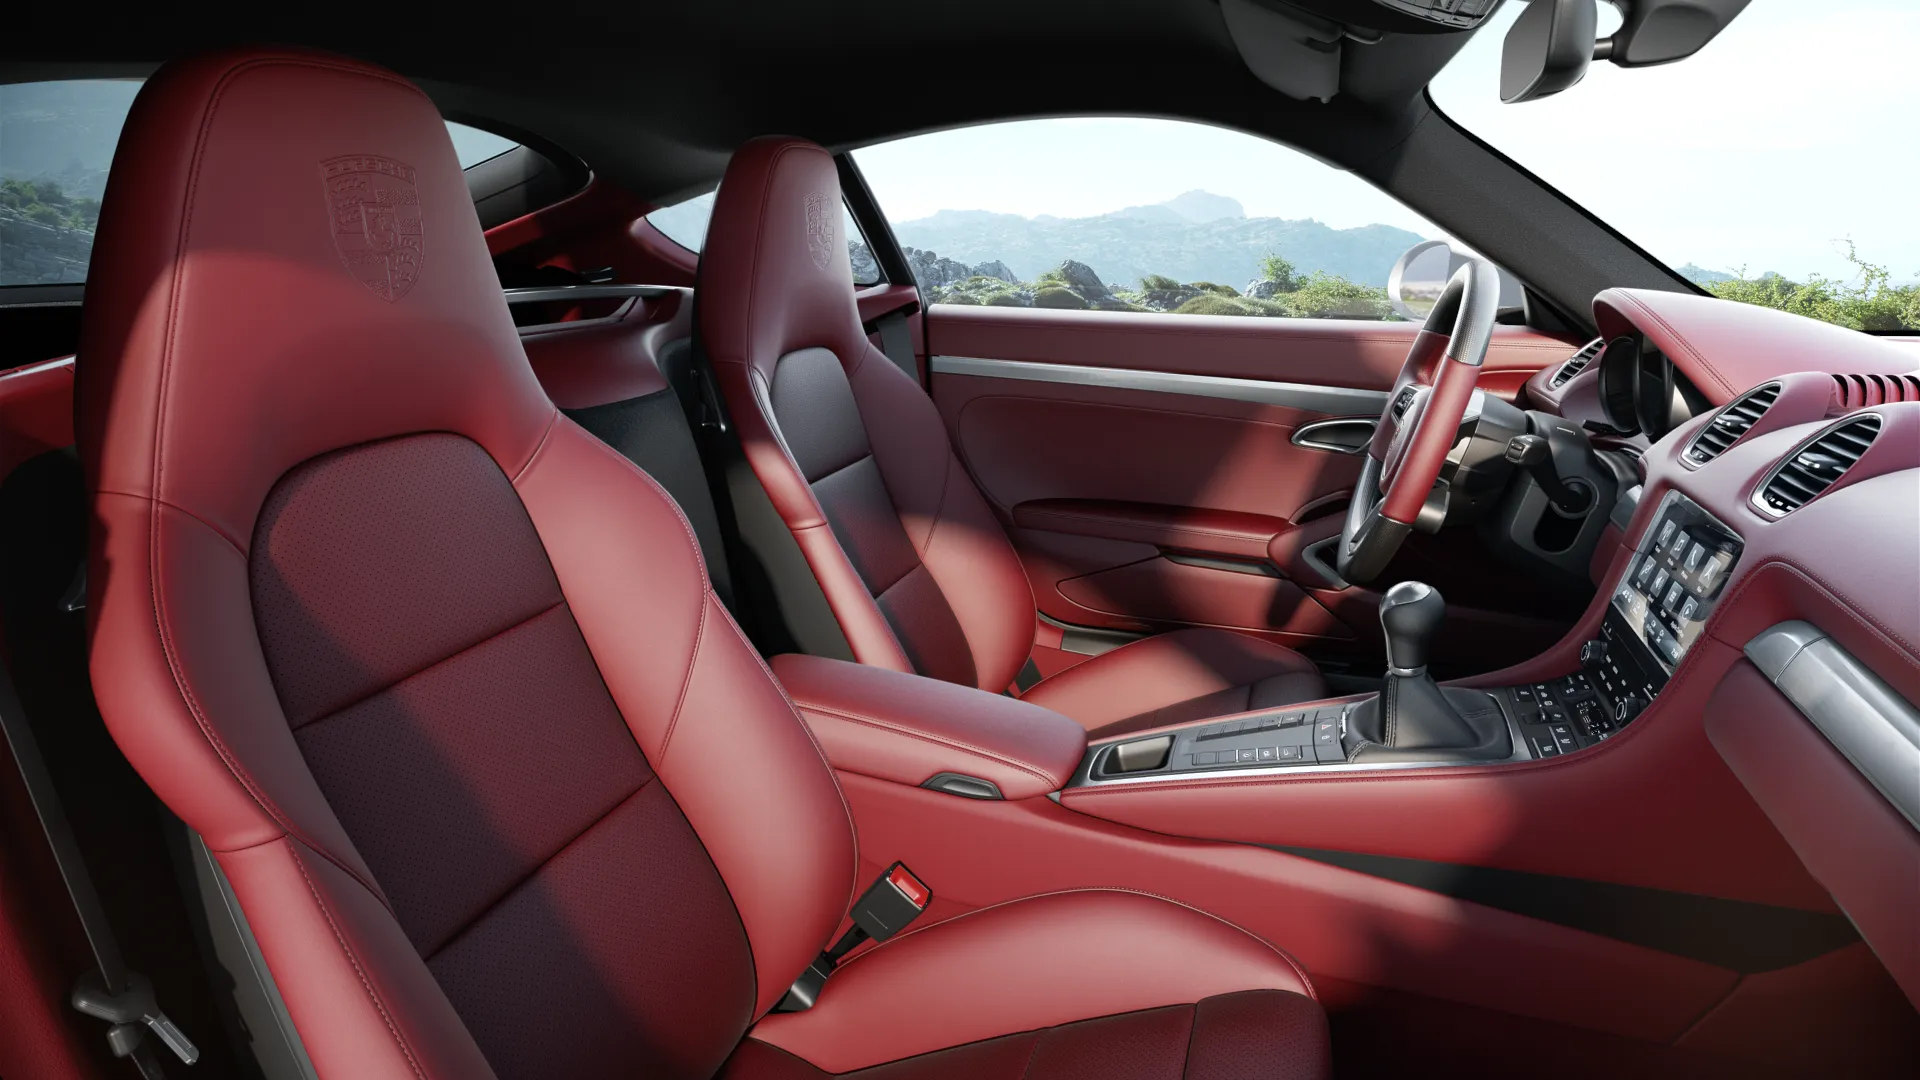 Interior view of 718 Cayman S